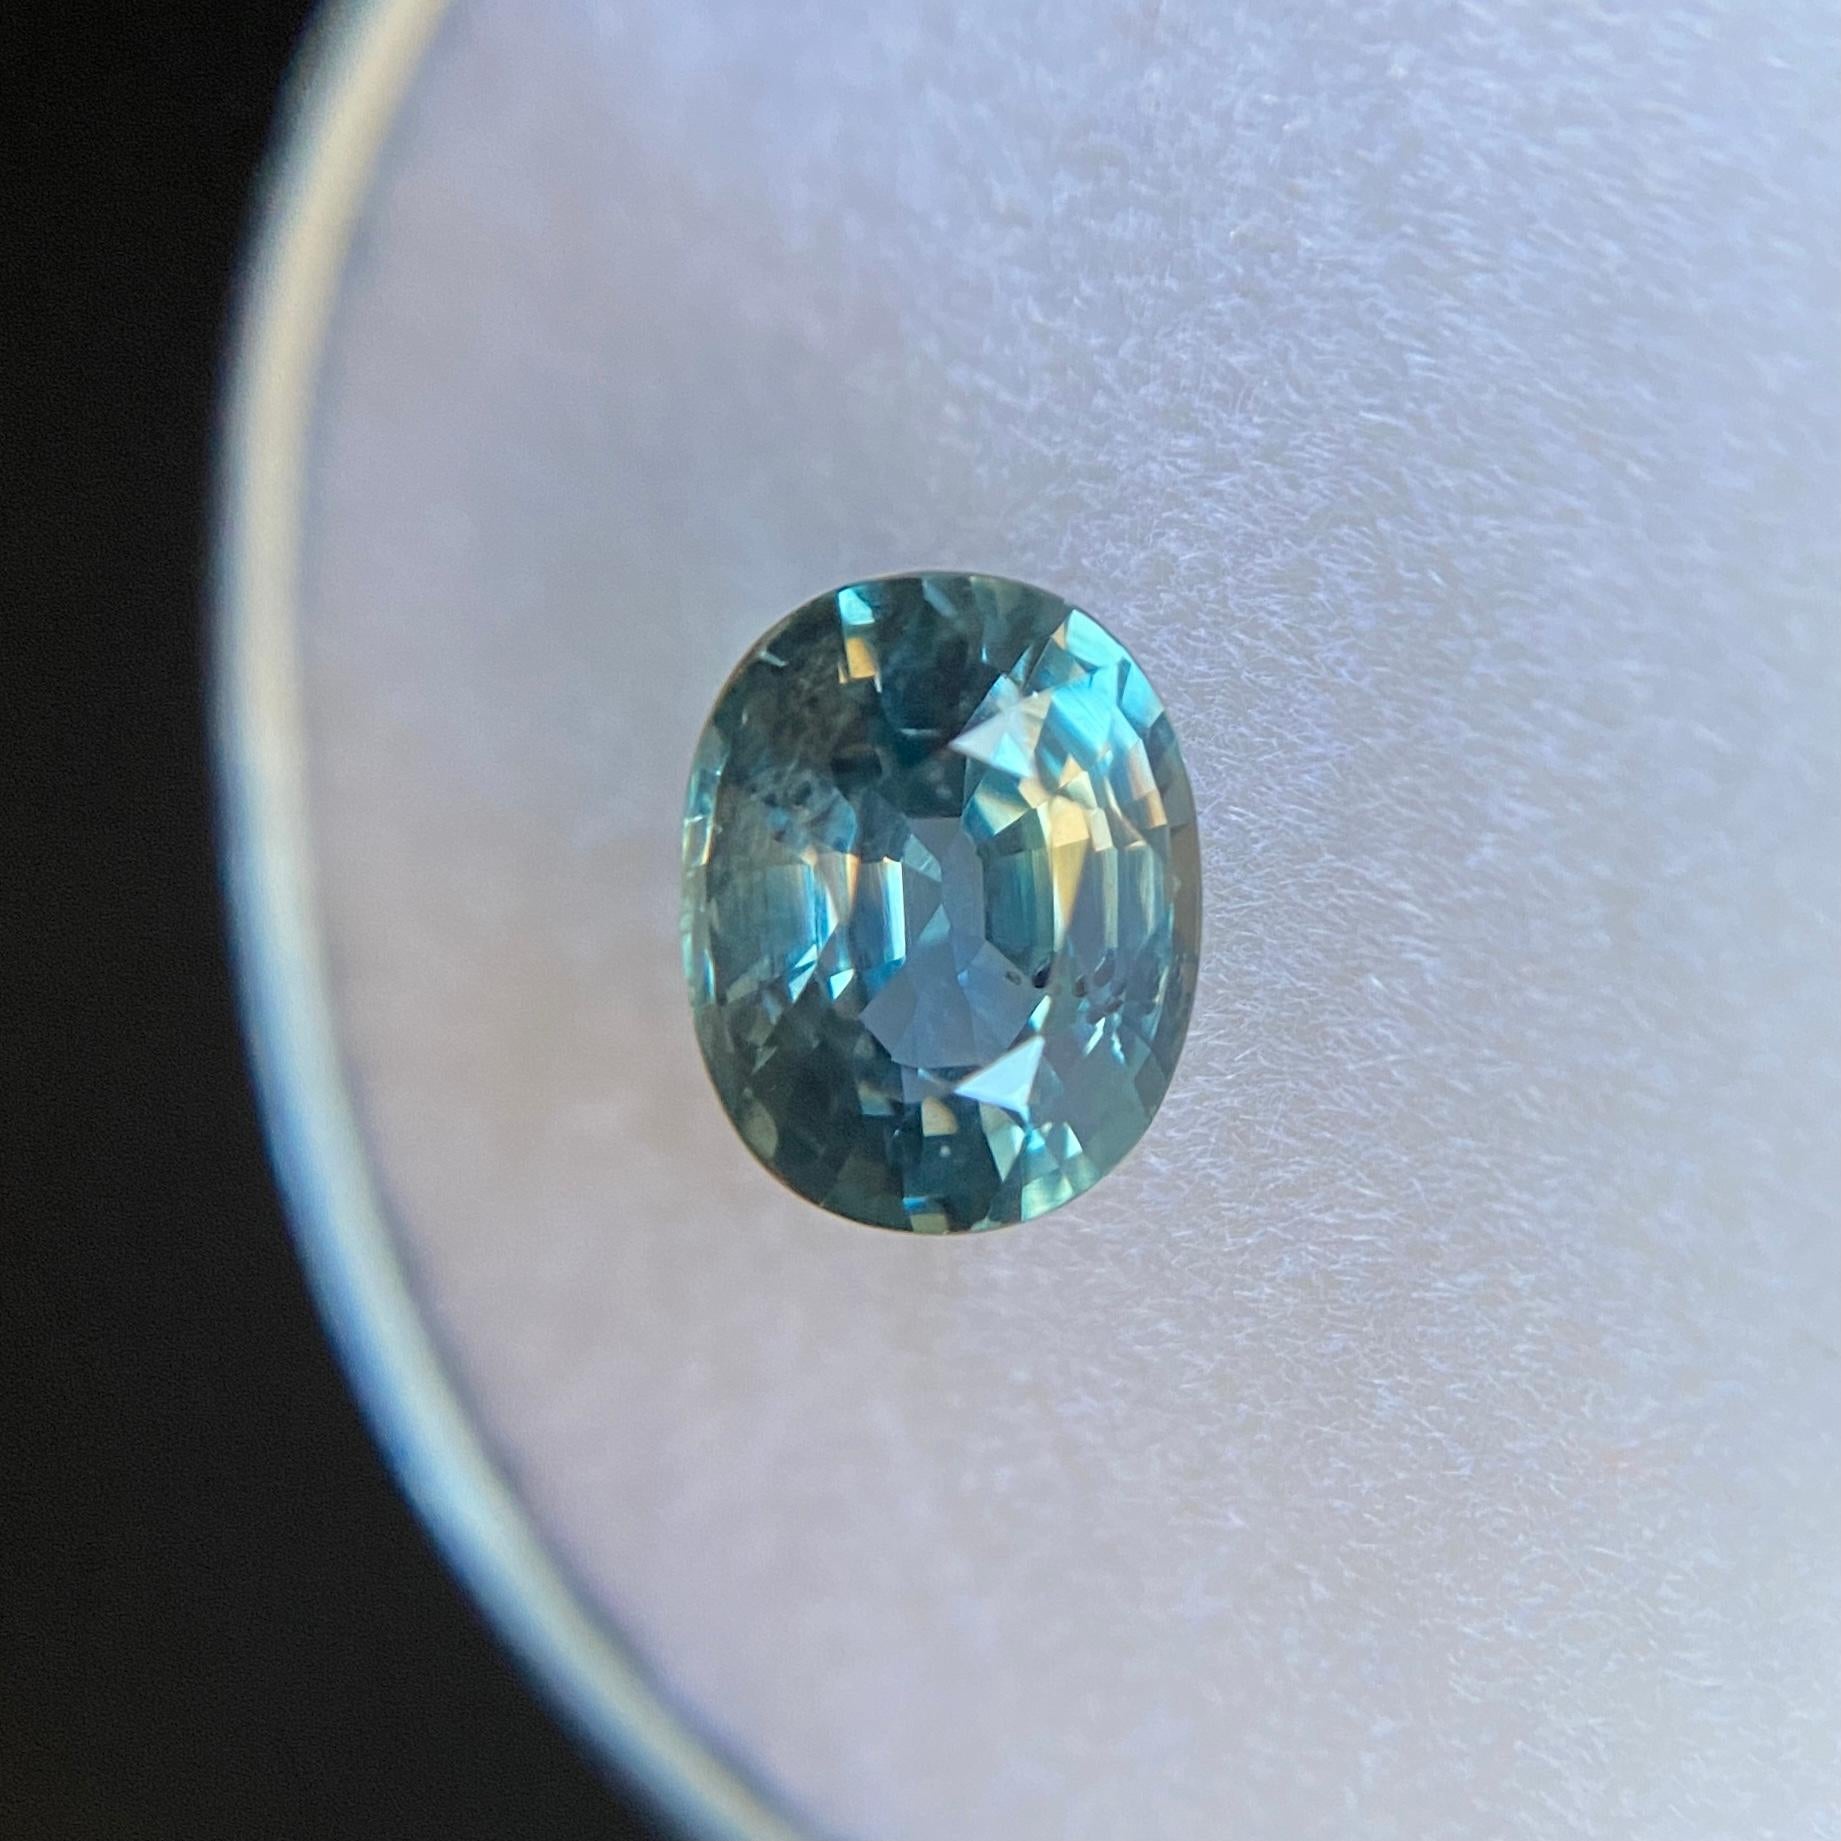 Fine Blue Untreated Teal Sapphire Gemstone.

Fine quality unheated sapphire with a beautiful green blue teal colour.

Fully certified by GIA confirming stone as natural and untreated. Very rare for natural sapphires.

1.35 Carat with excellent